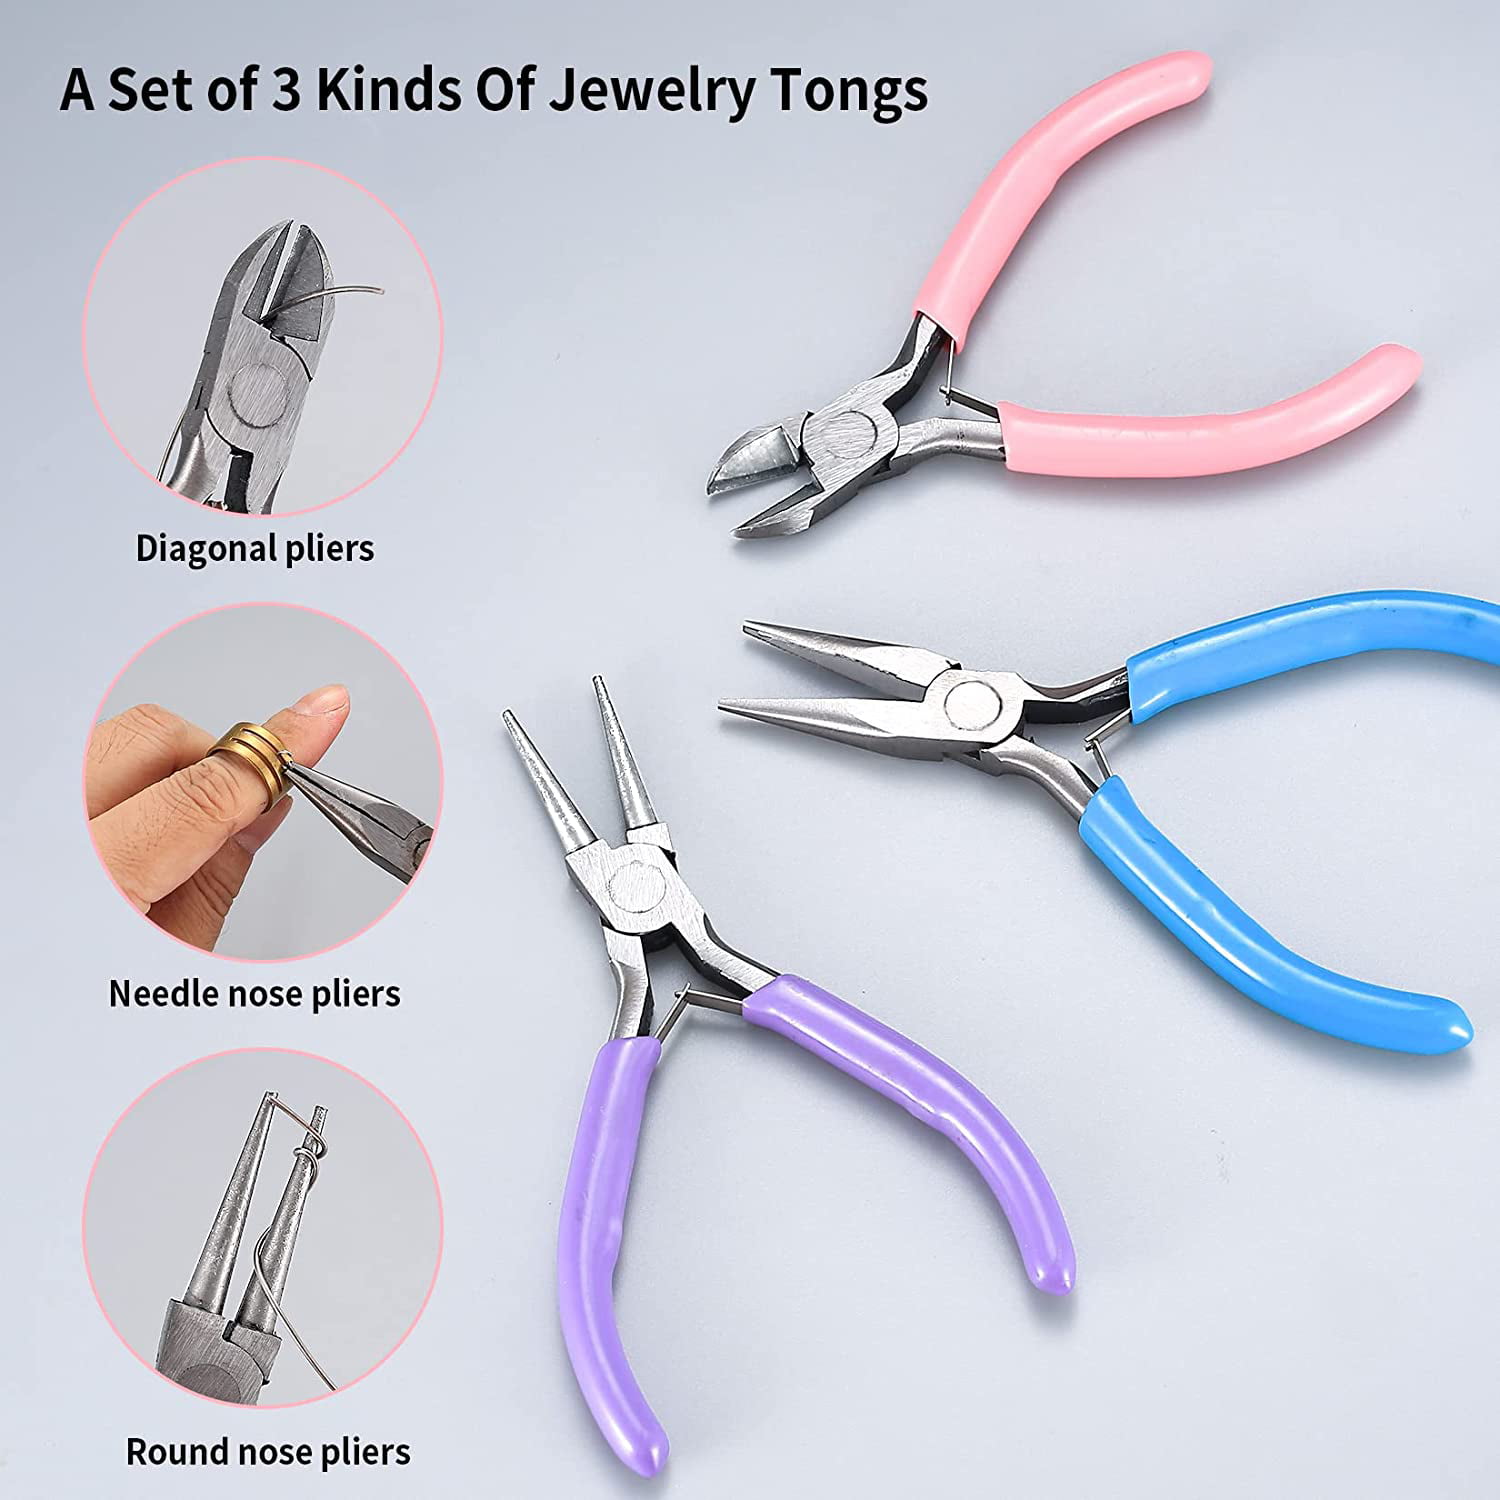  LiQunSweet 3 in 1 Jewelry Pliers Set with Side Cutting Round  Nose Pliers Flat Nose Pliers Polishing Tools Equipment for Jewelry Beading  Making Crafts Supplies : Tools & Home Improvement